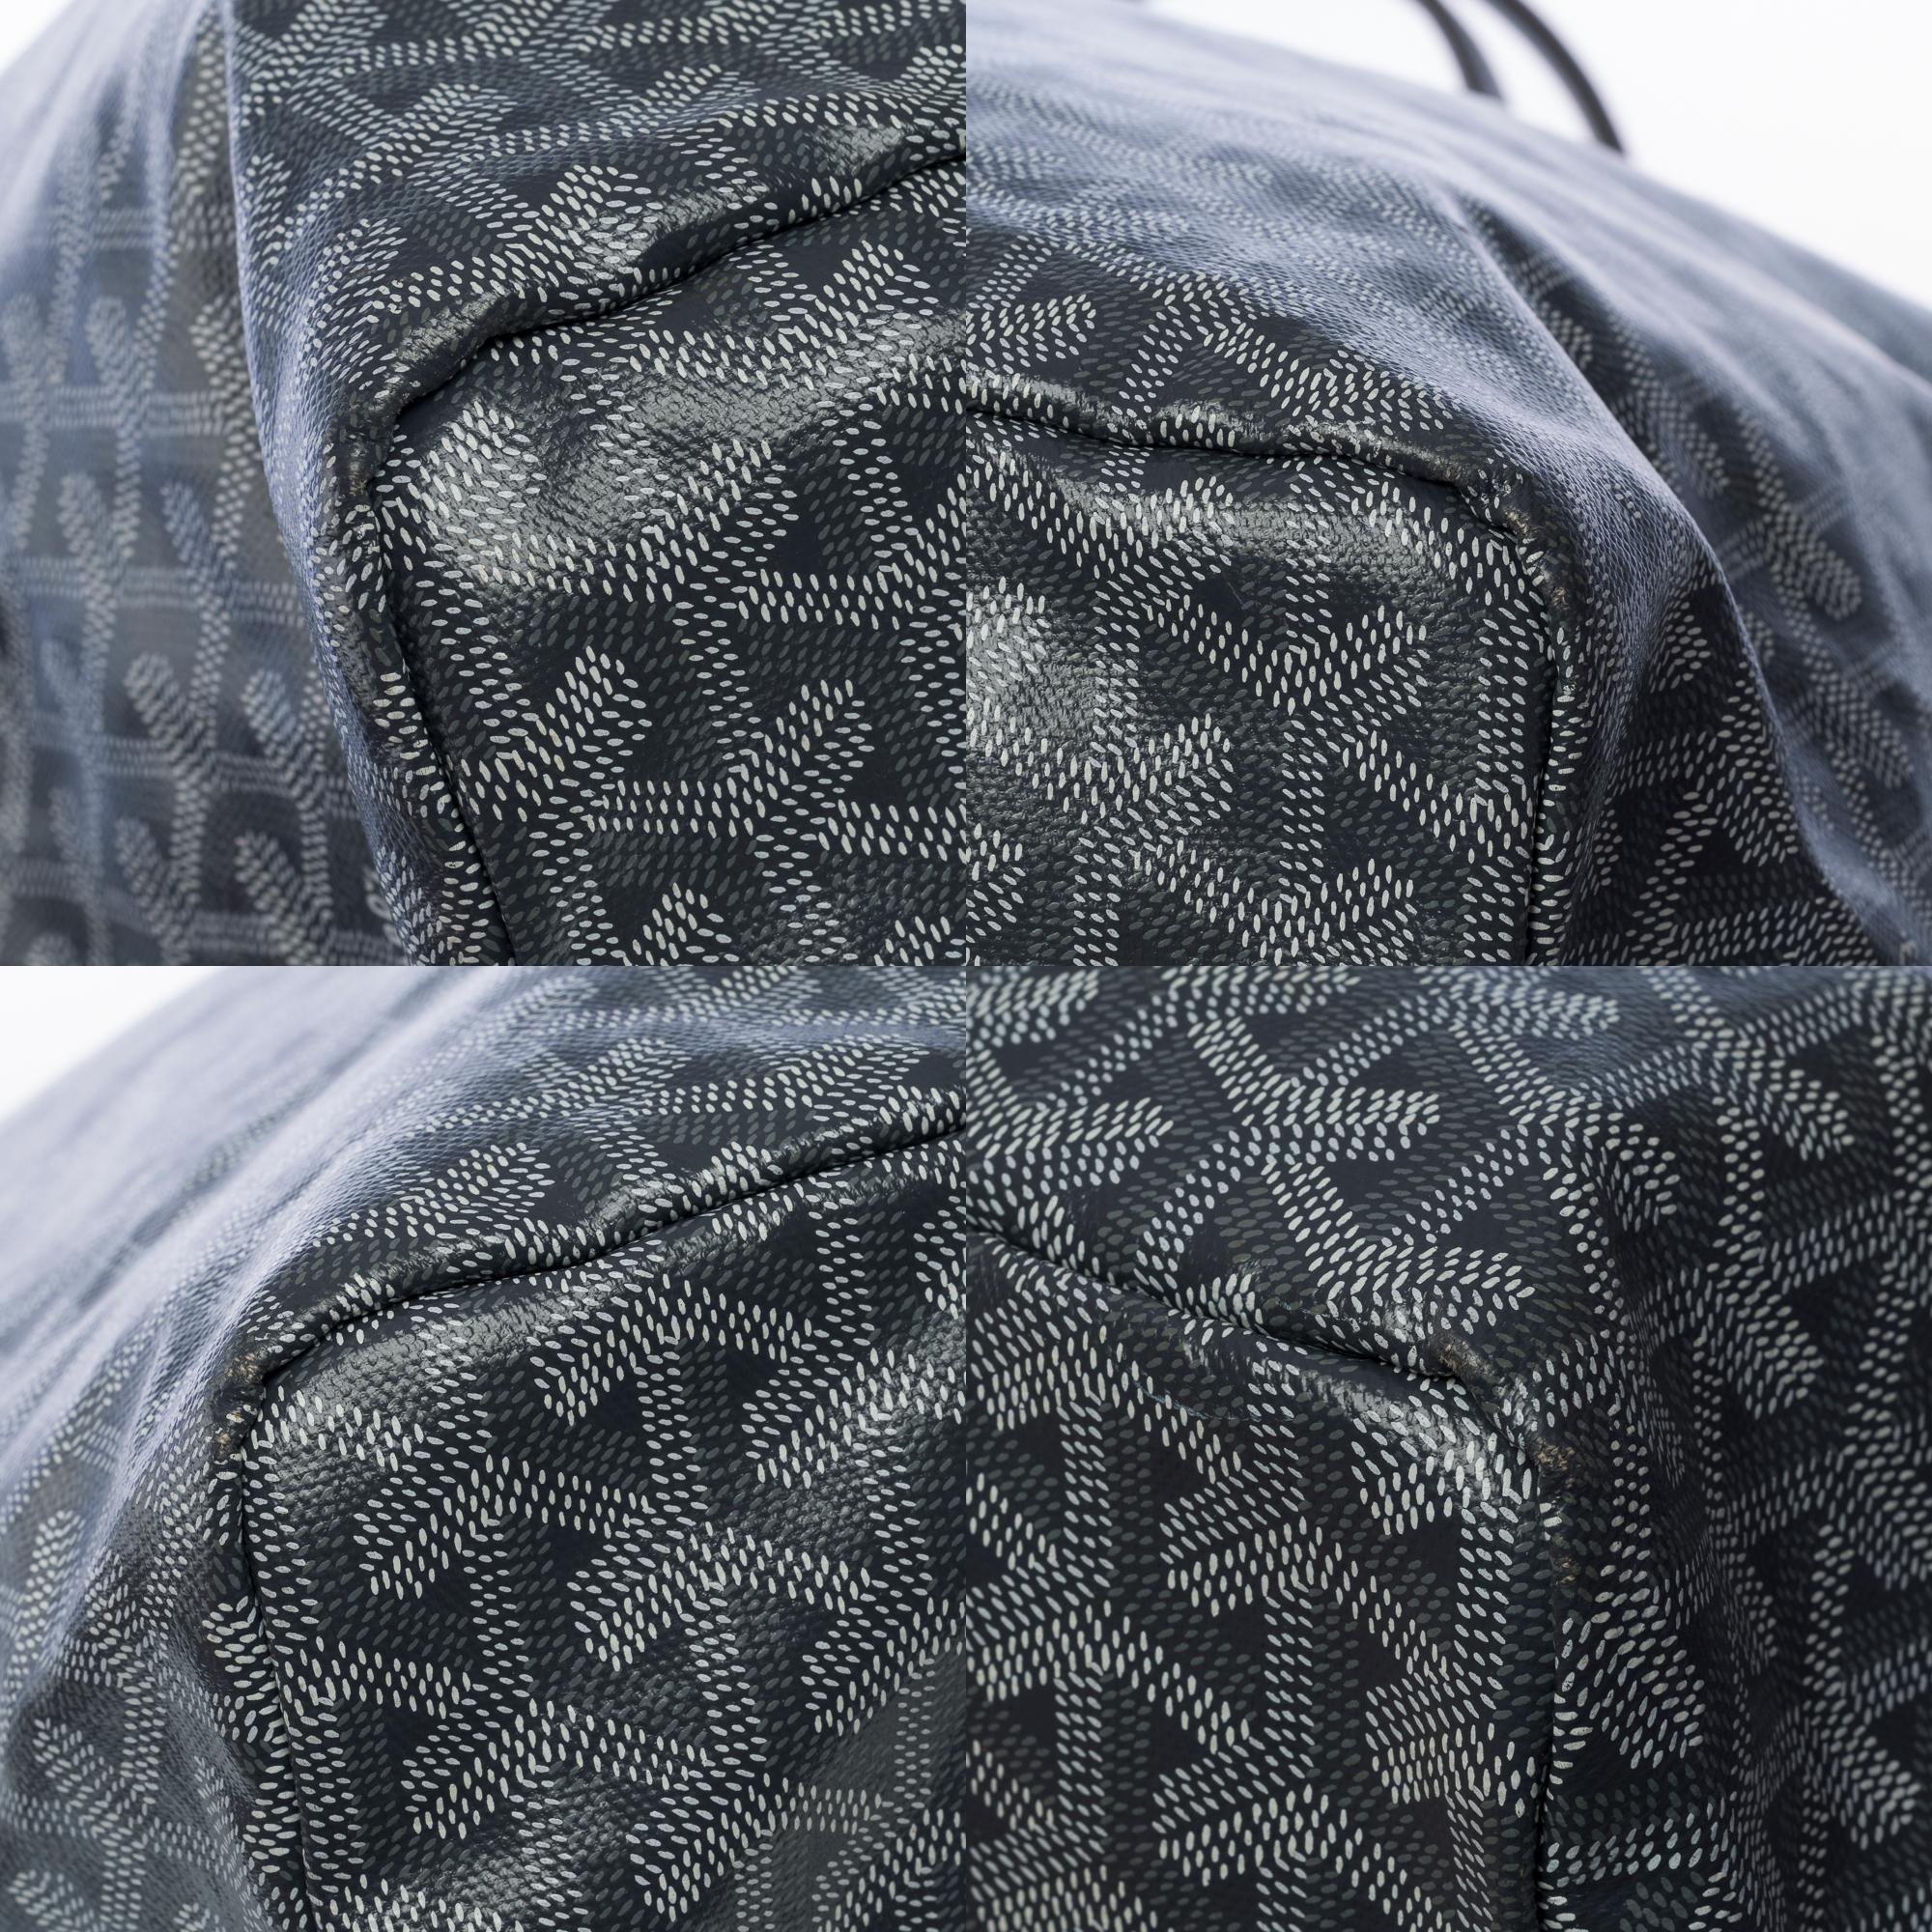 The Coveted Goyard Saint-Louis GM Tote bag in grey and white canvas, SHW 4